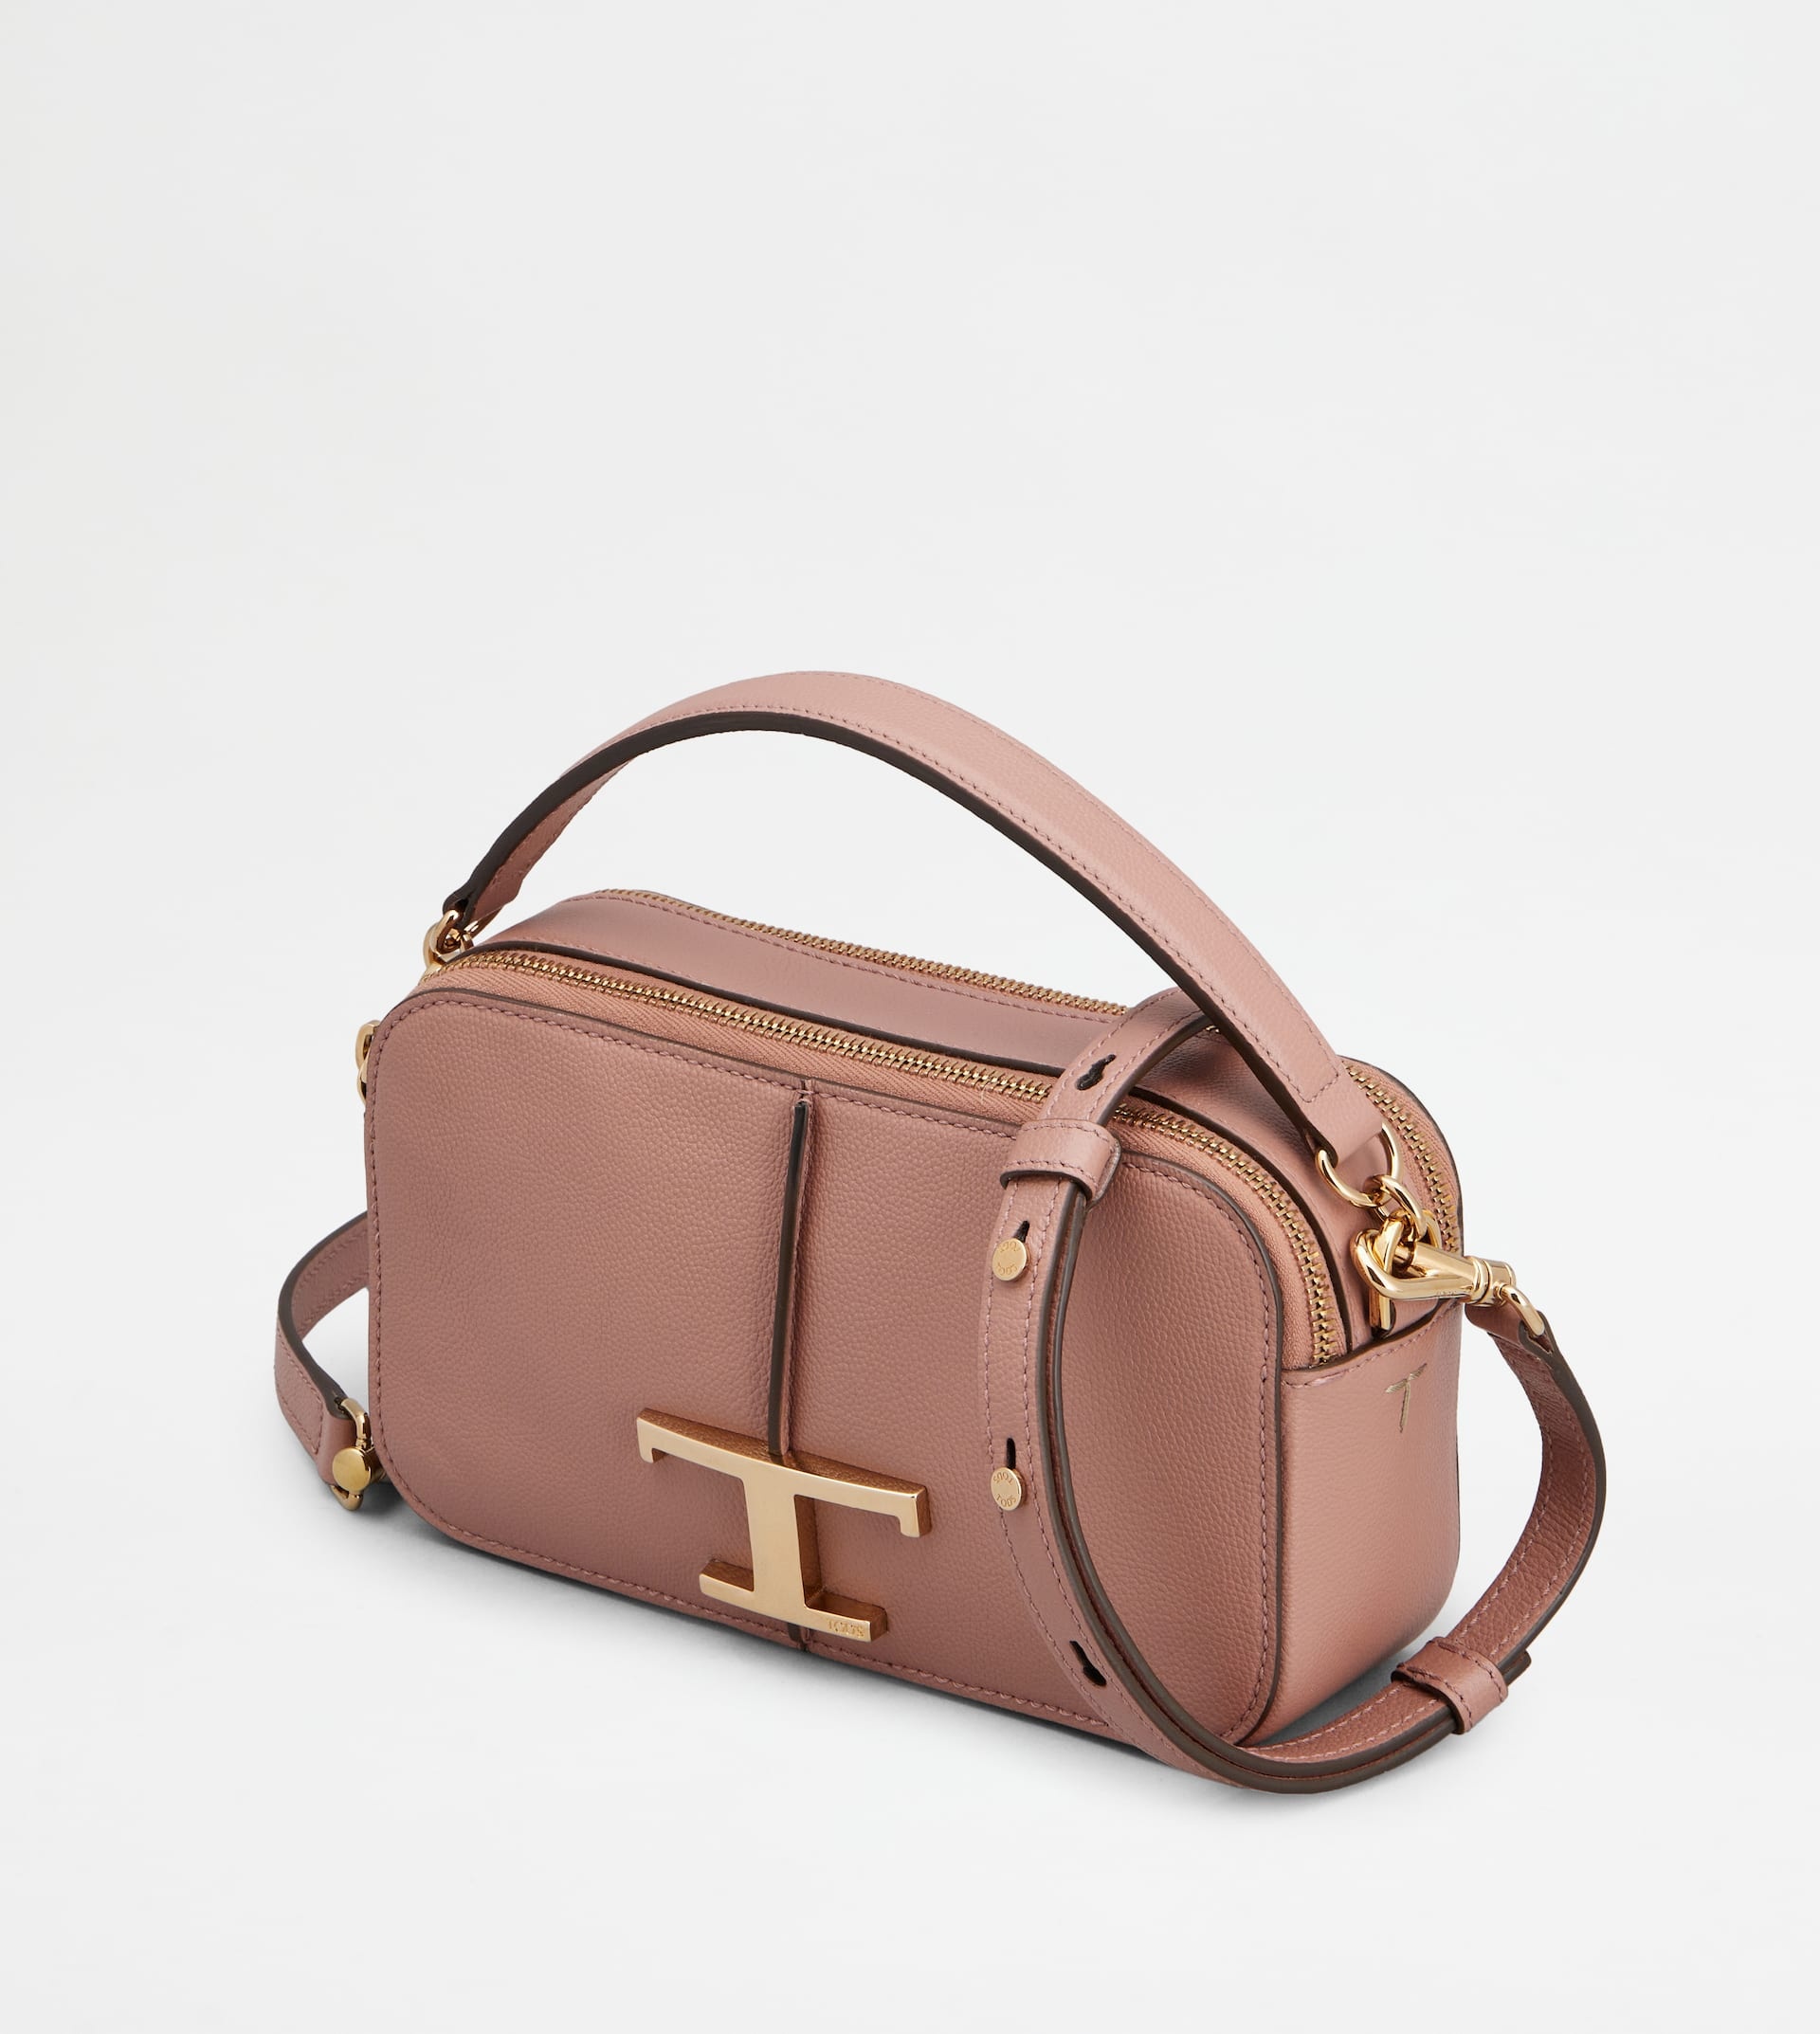 T TIMELESS CAMERA BAG IN LEATHER MINI - PINK - 6